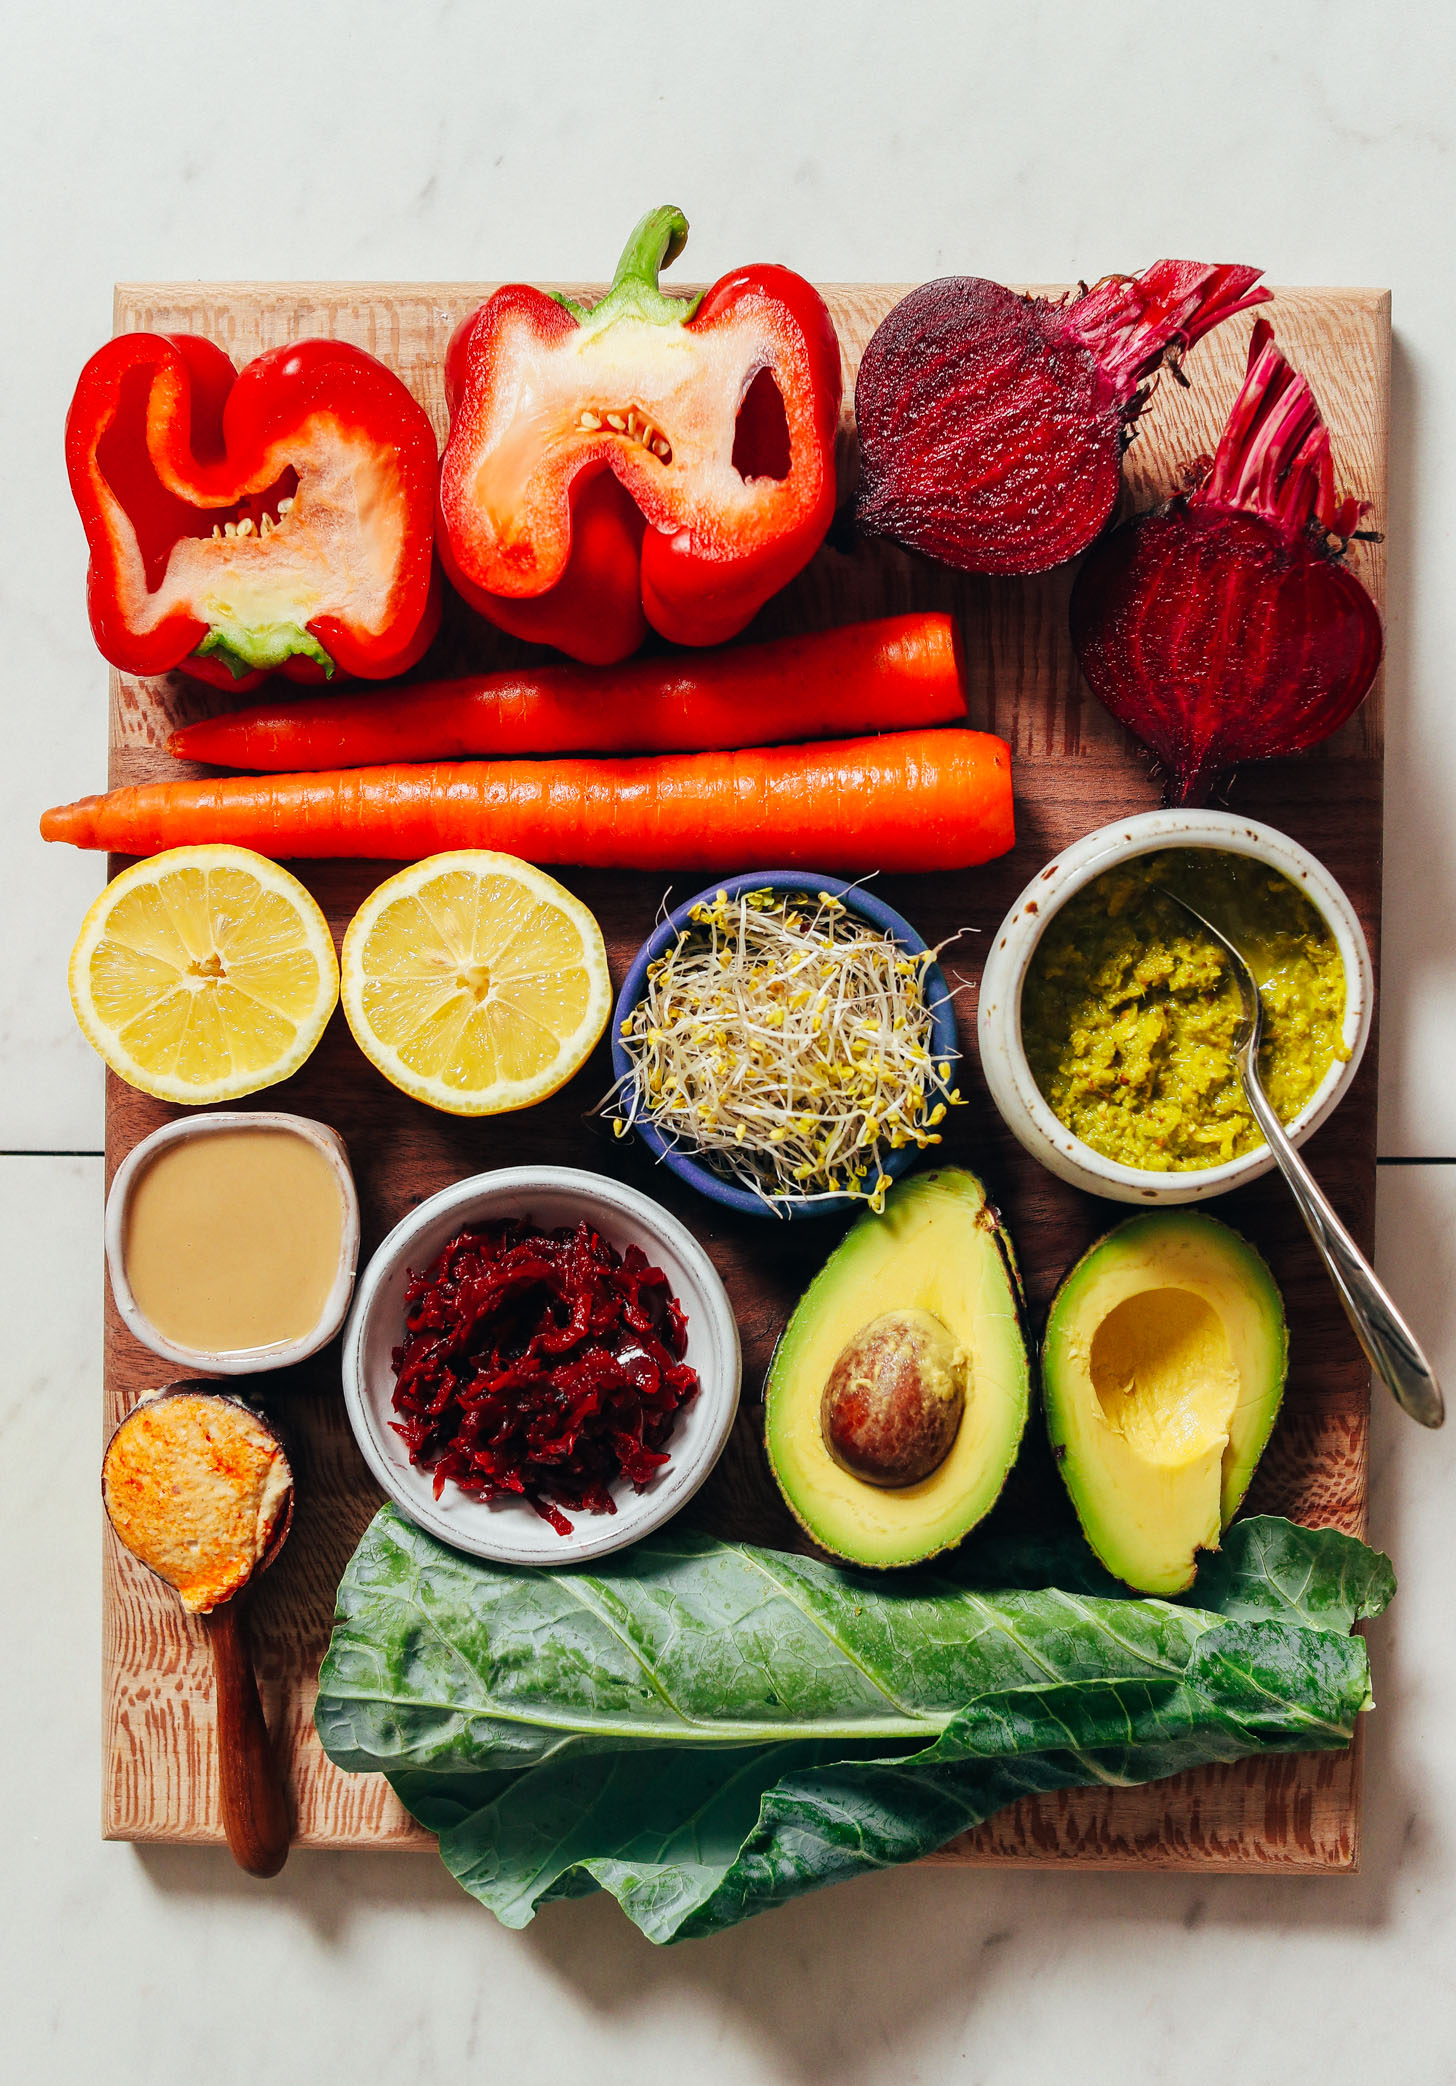 Wood cutting board with bell pepper, carrot, beet, lemon, sprouts, avocado, hummus, tahini, green curry paste, and collard greens